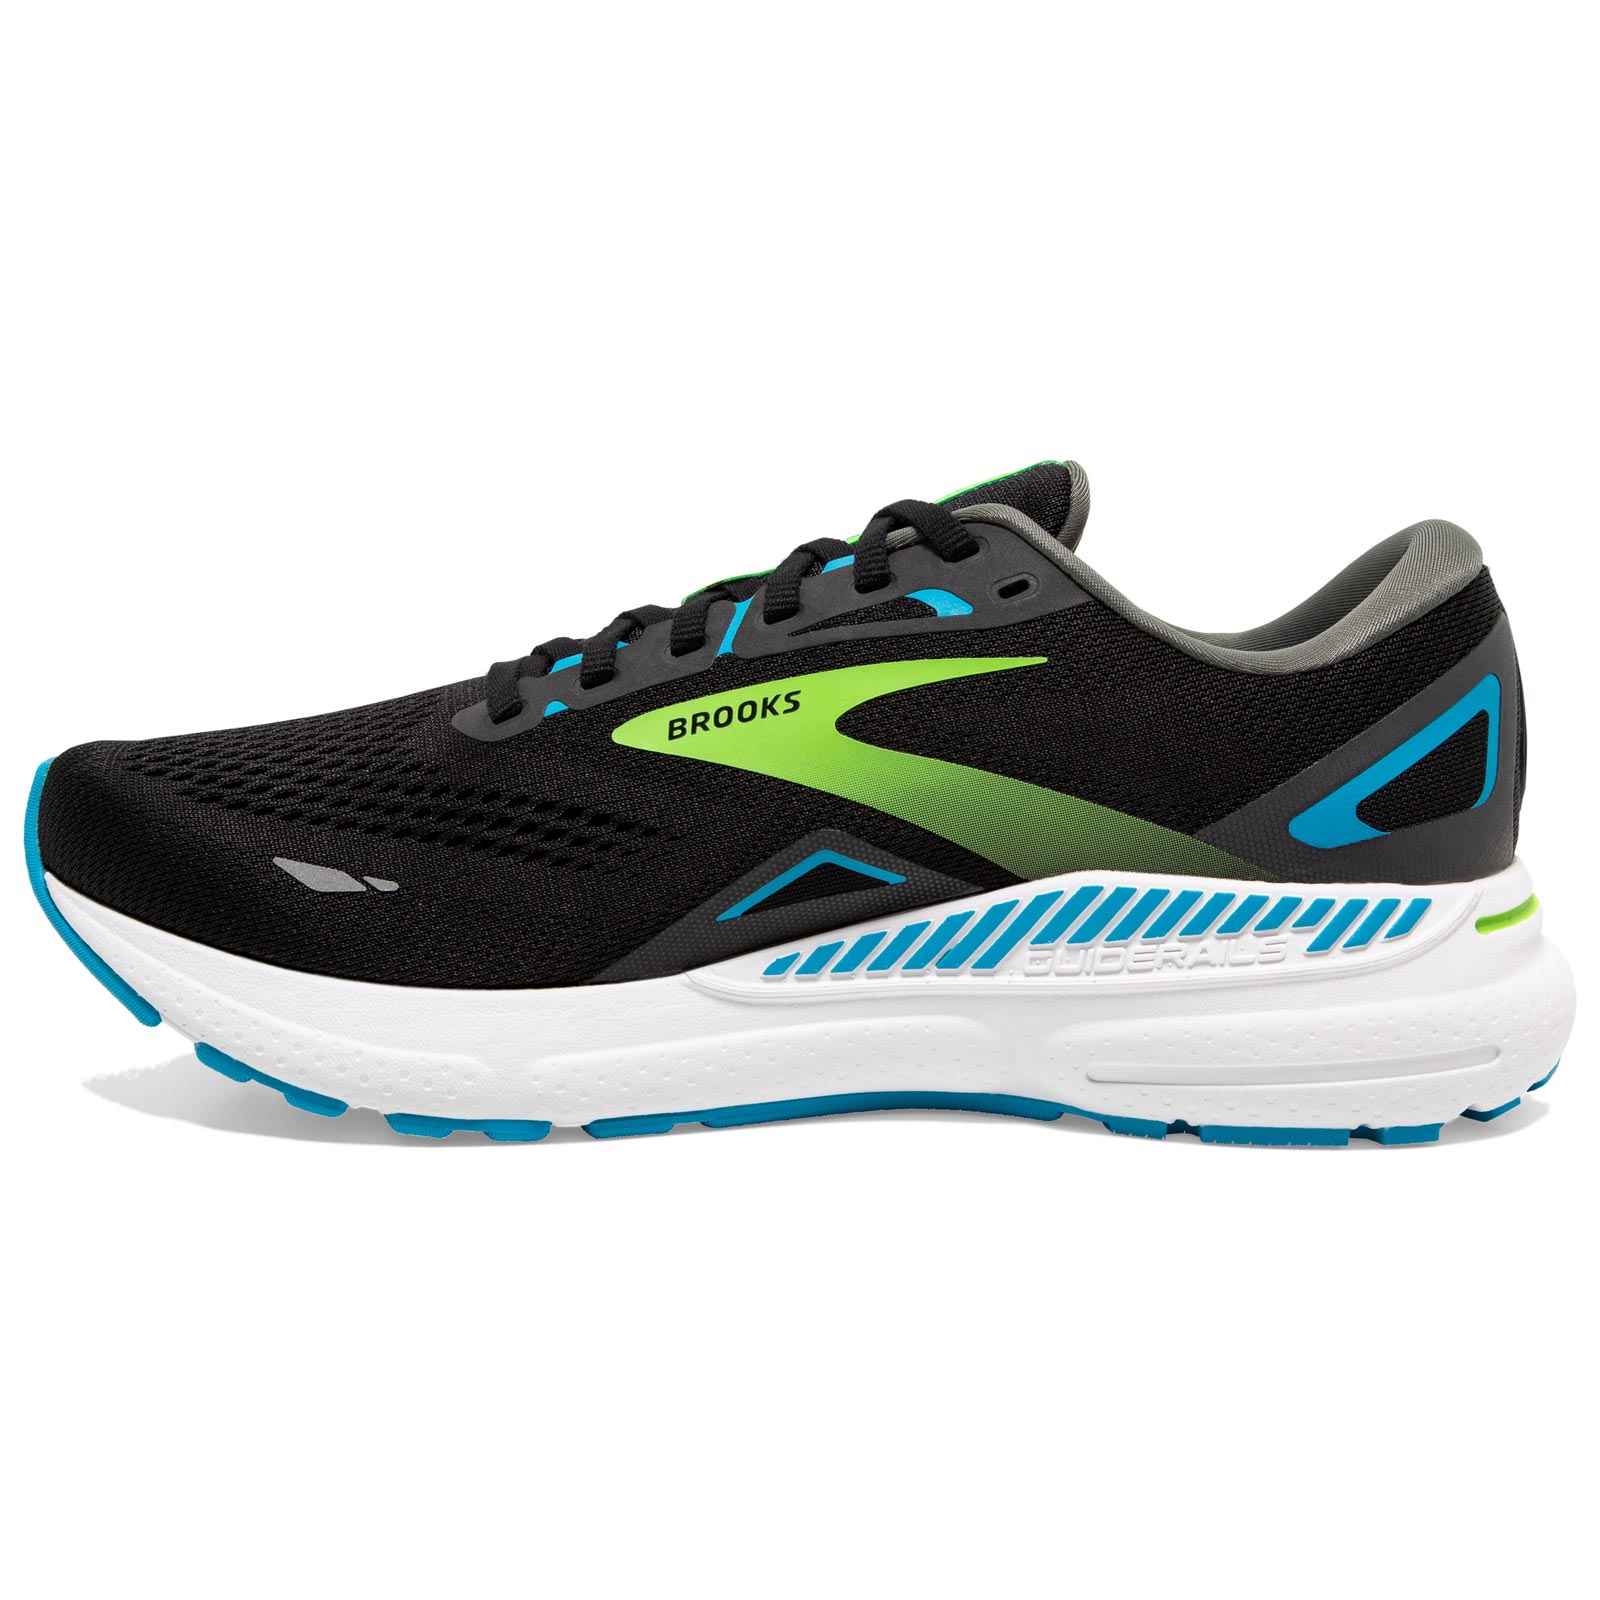 BROOKS ADRENALINE GTS 23 MENS RUNNING SHOES (WIDE-FIT)